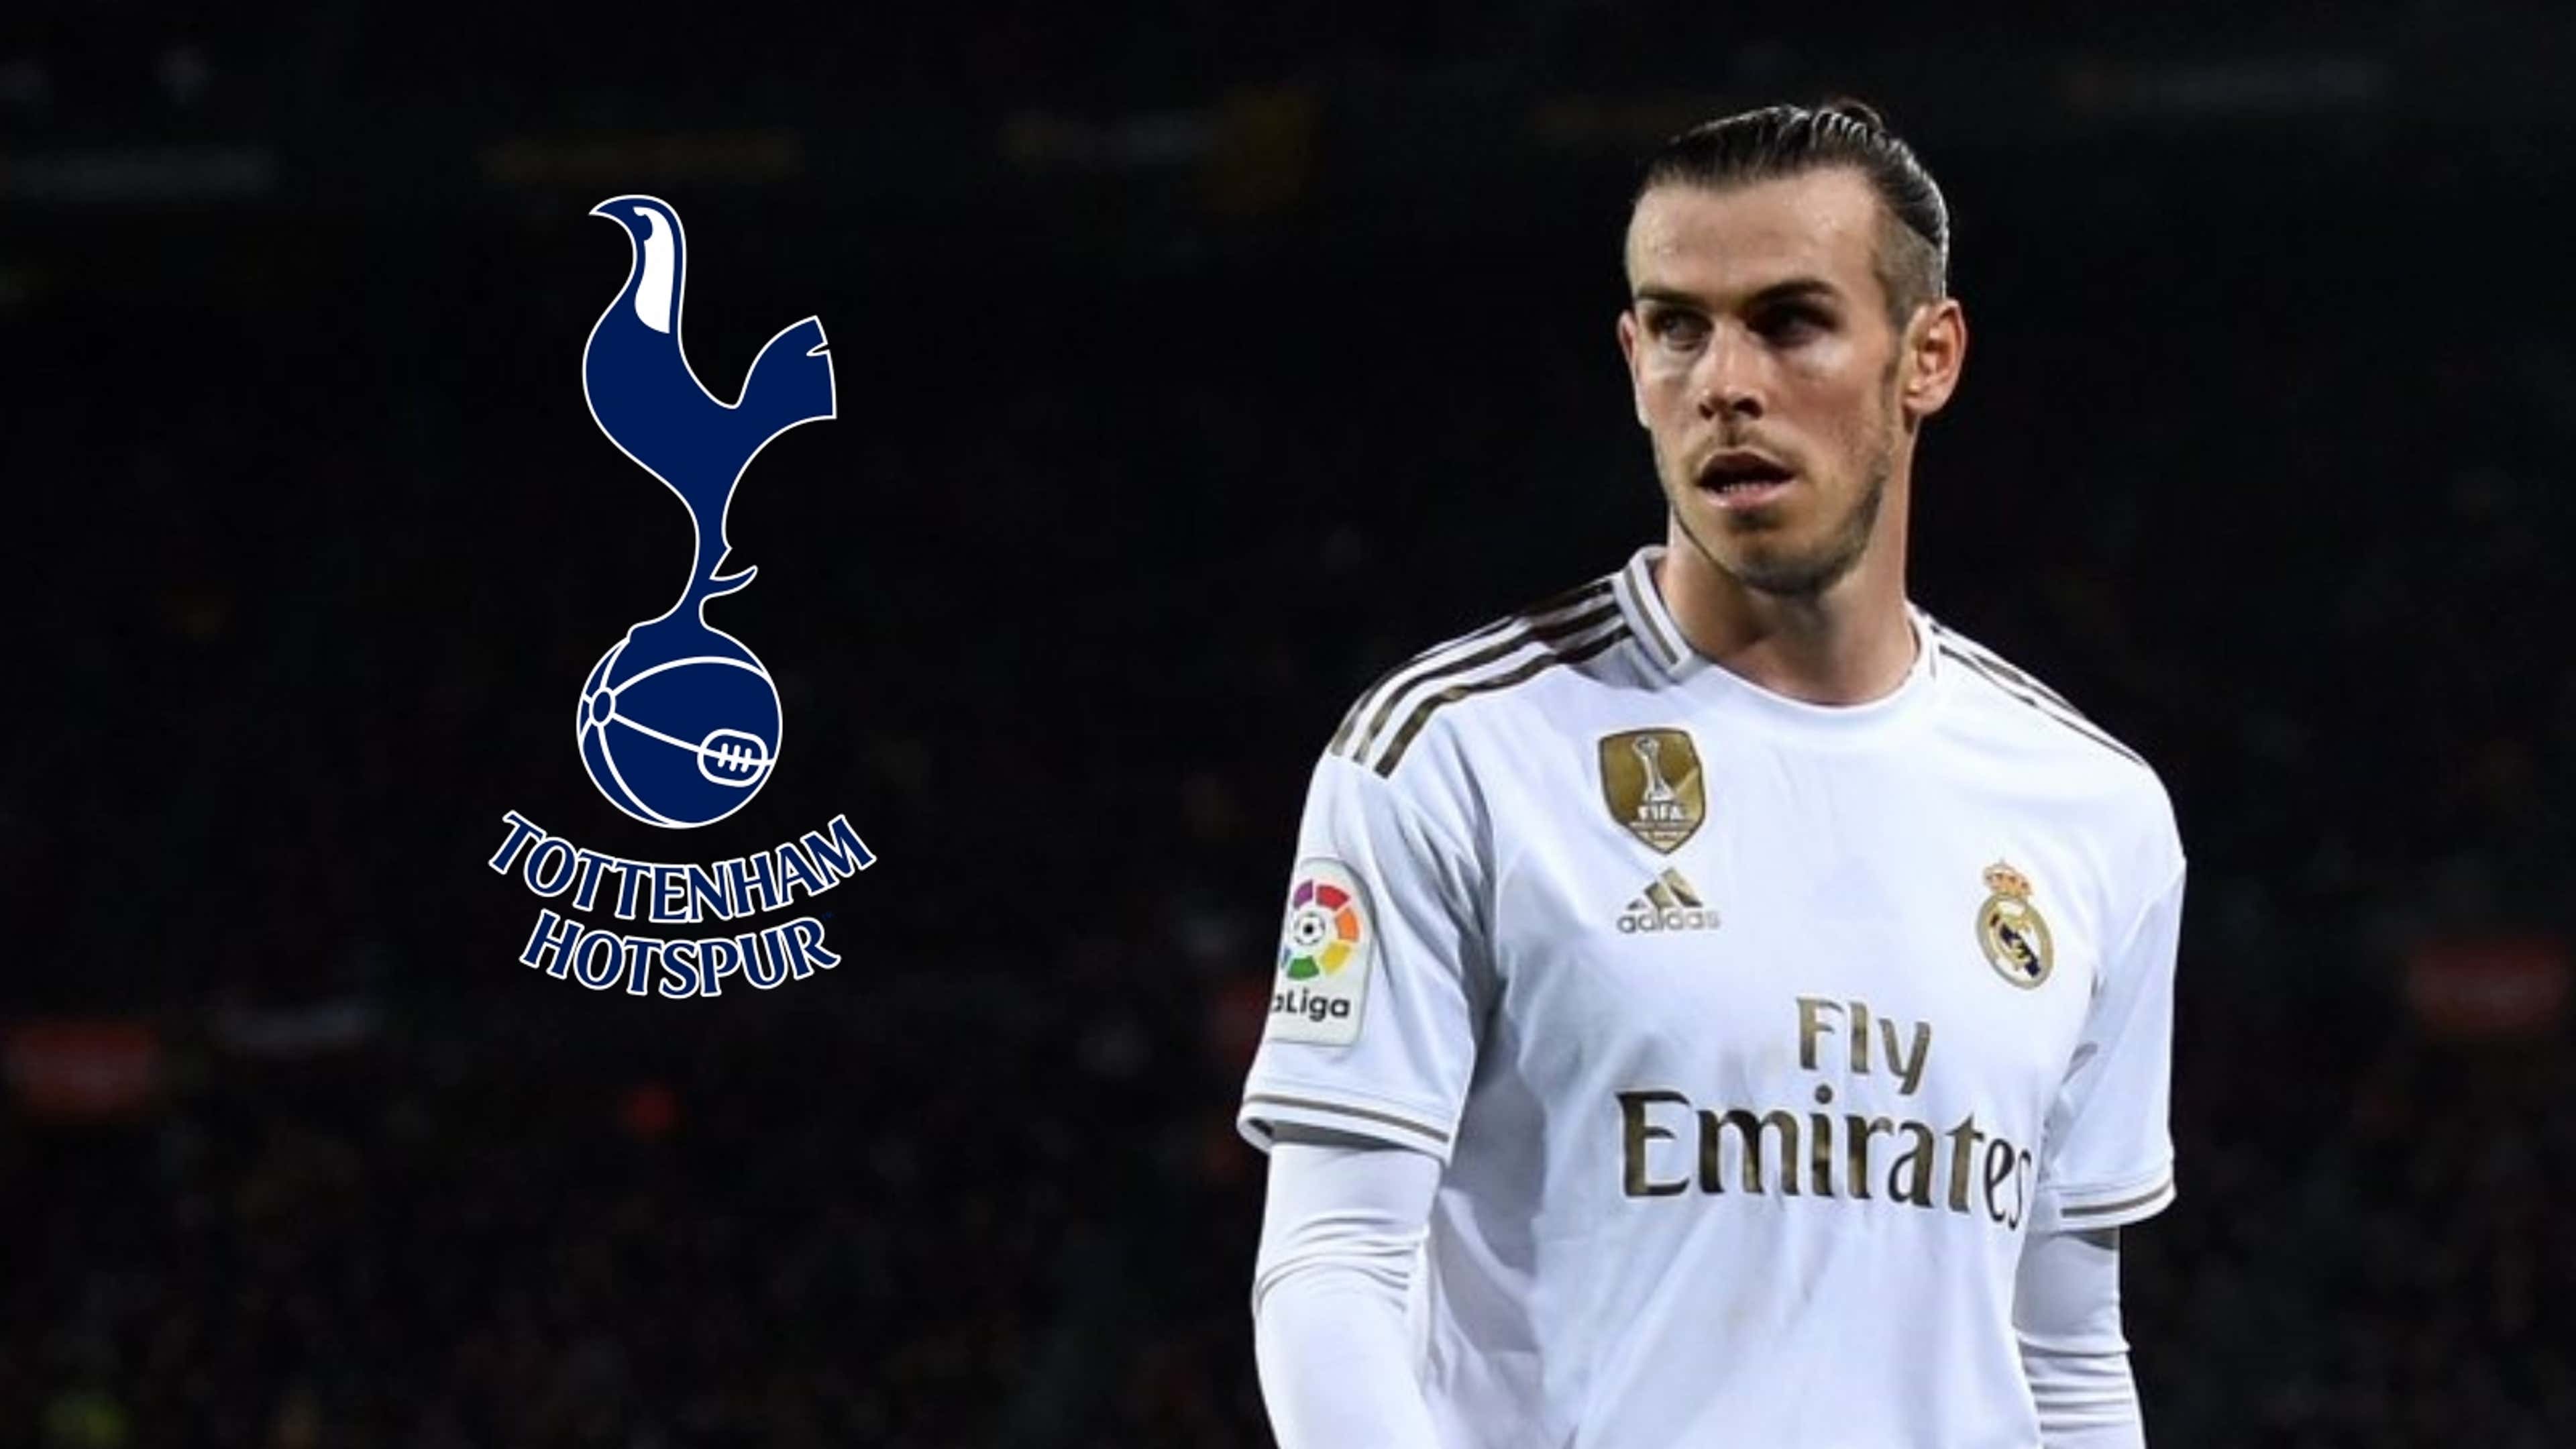 Gareth Bale: Tottenham could make 'huge statement' by re-signing